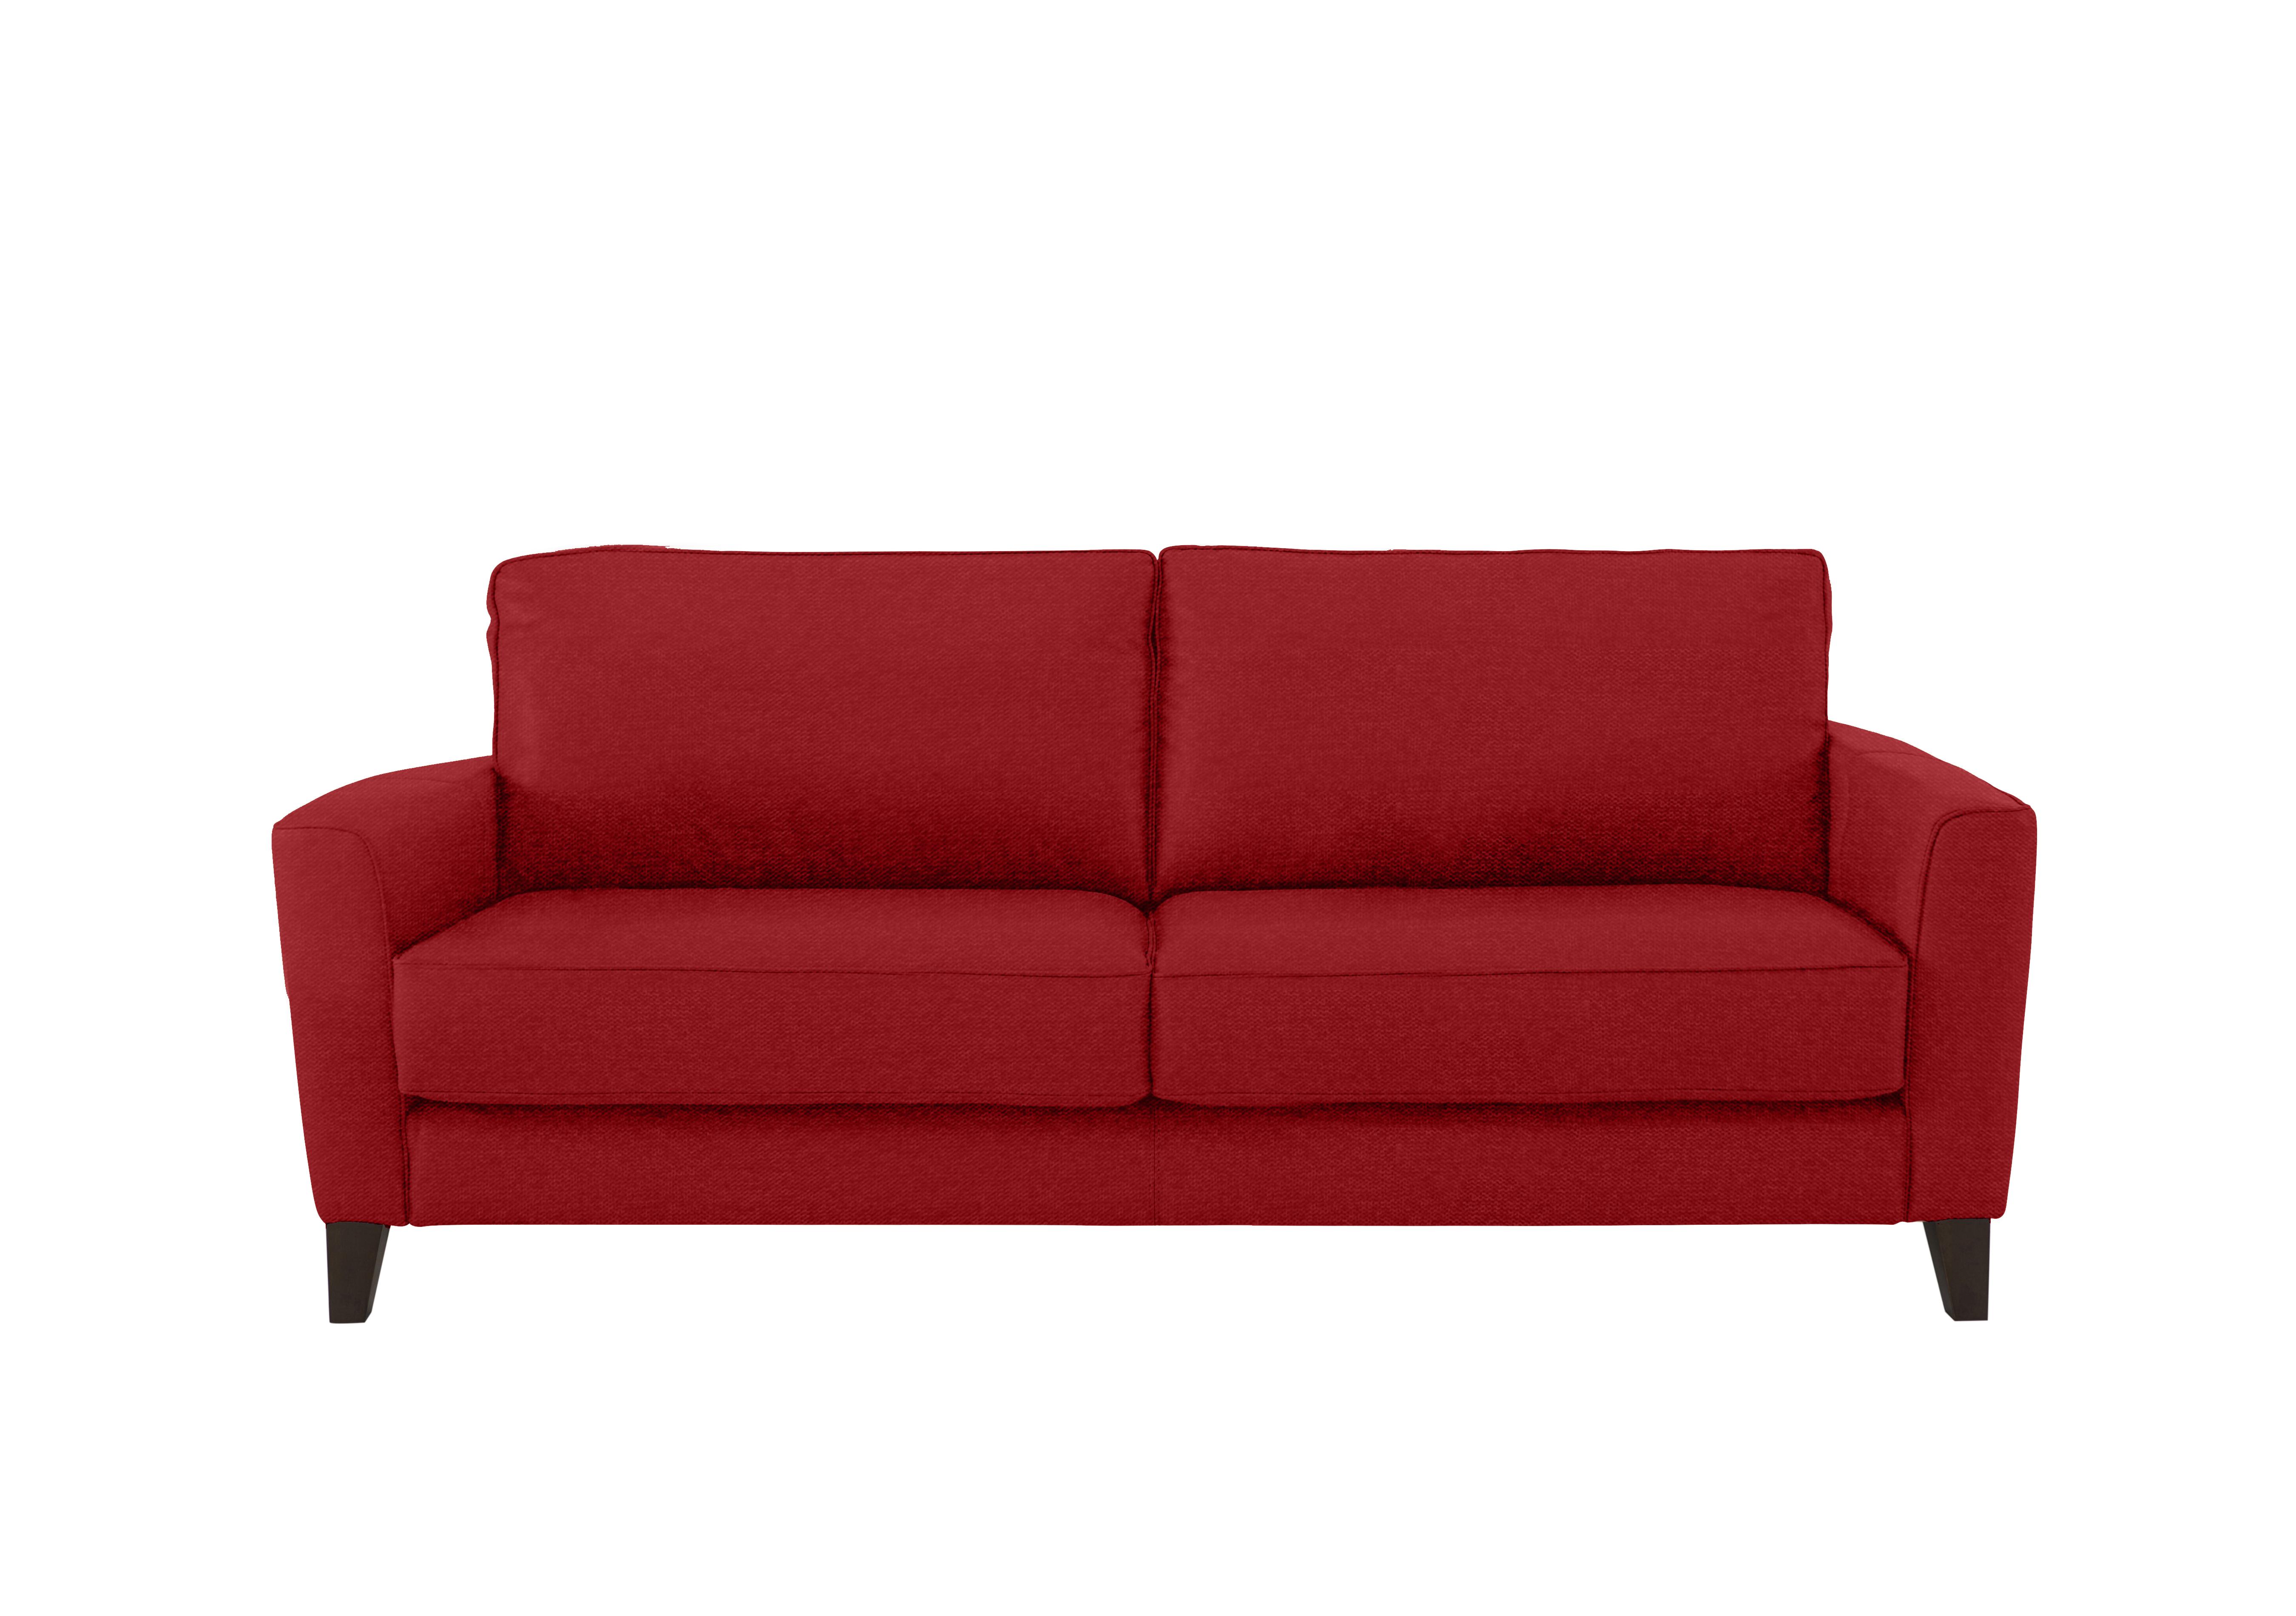 Brondby 3 Seater Fabric Sofa in Fab-Blt-R29 Red on Furniture Village